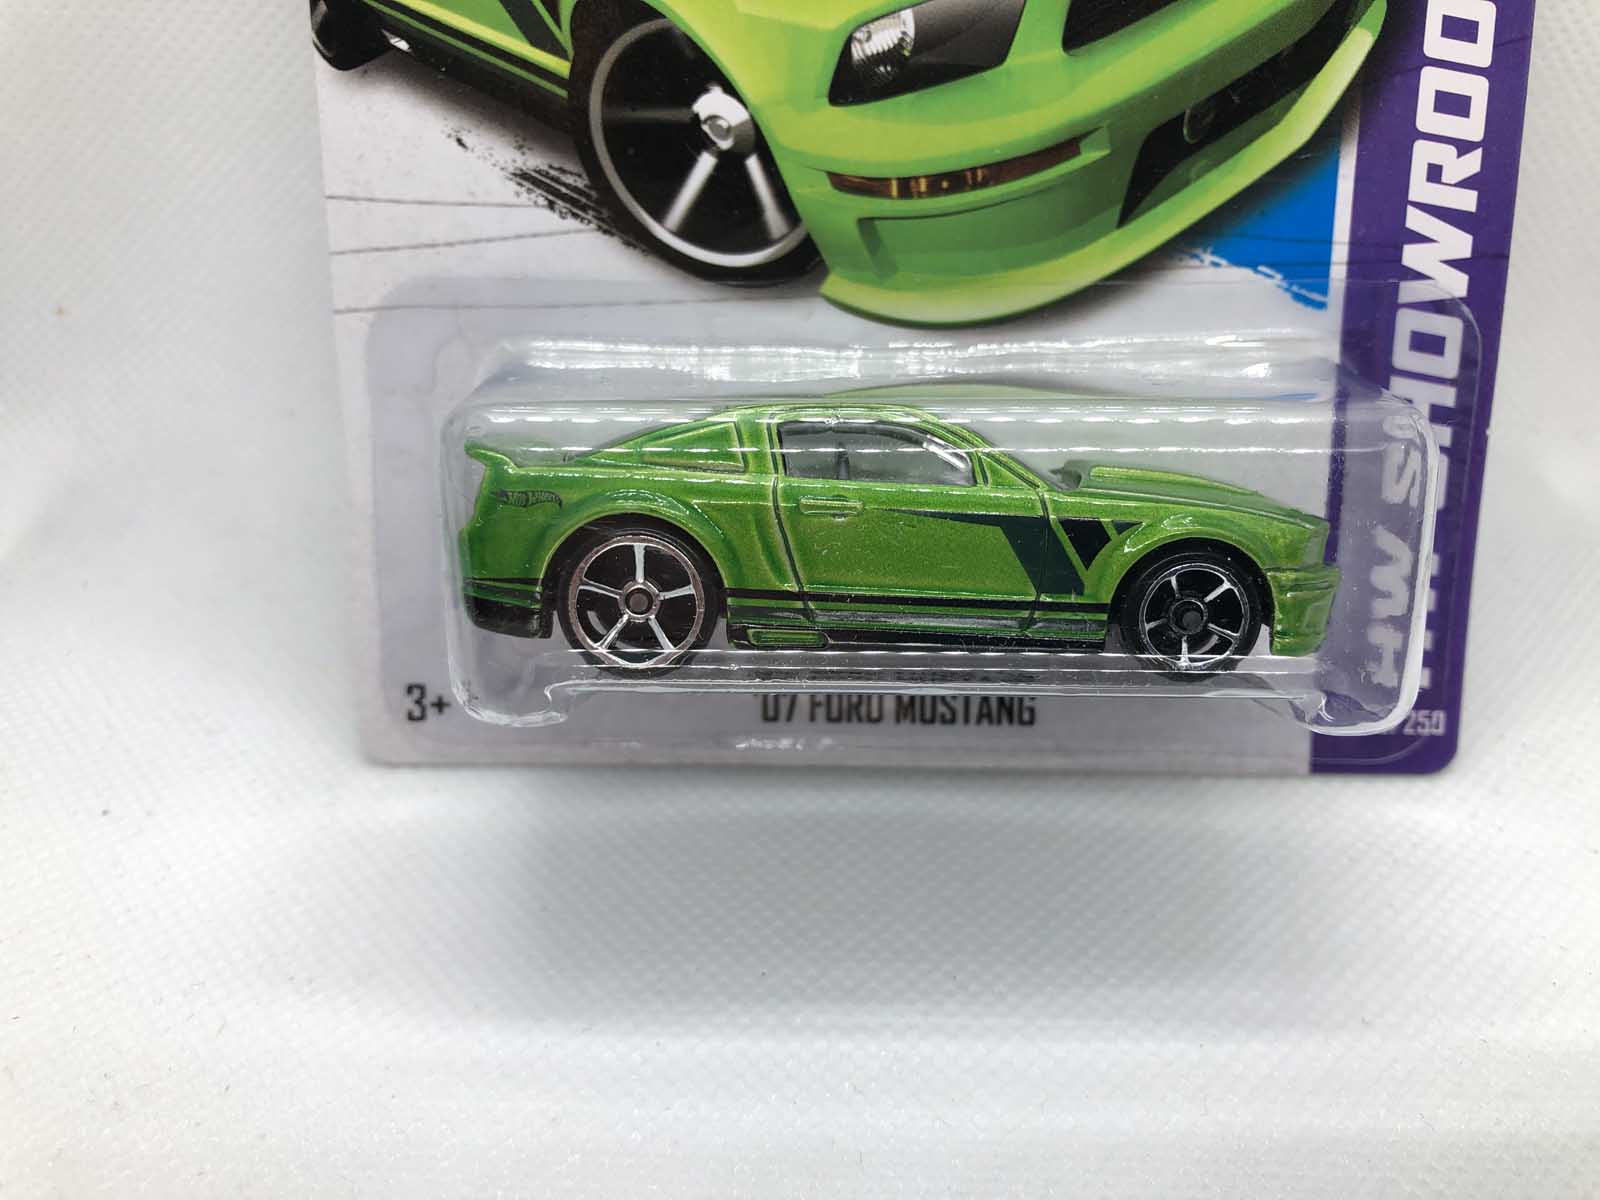 '07 Ford Mustang Hot Wheels